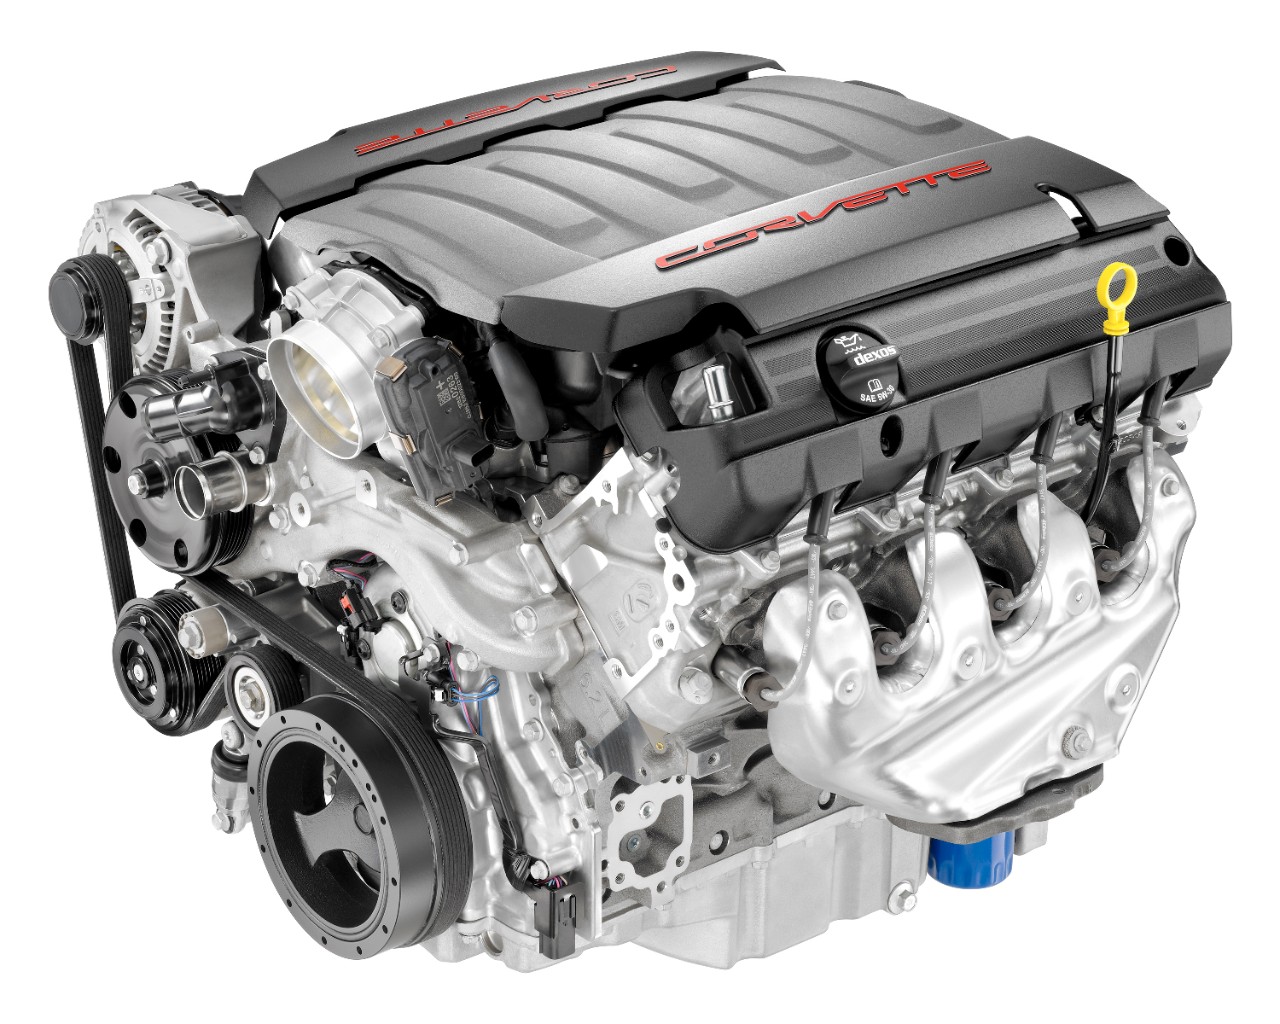 AFM will be critical in helping the base model Corvette achieve at least 26 mpg on the highway, which is a lofty number for such a performance-oriented ...